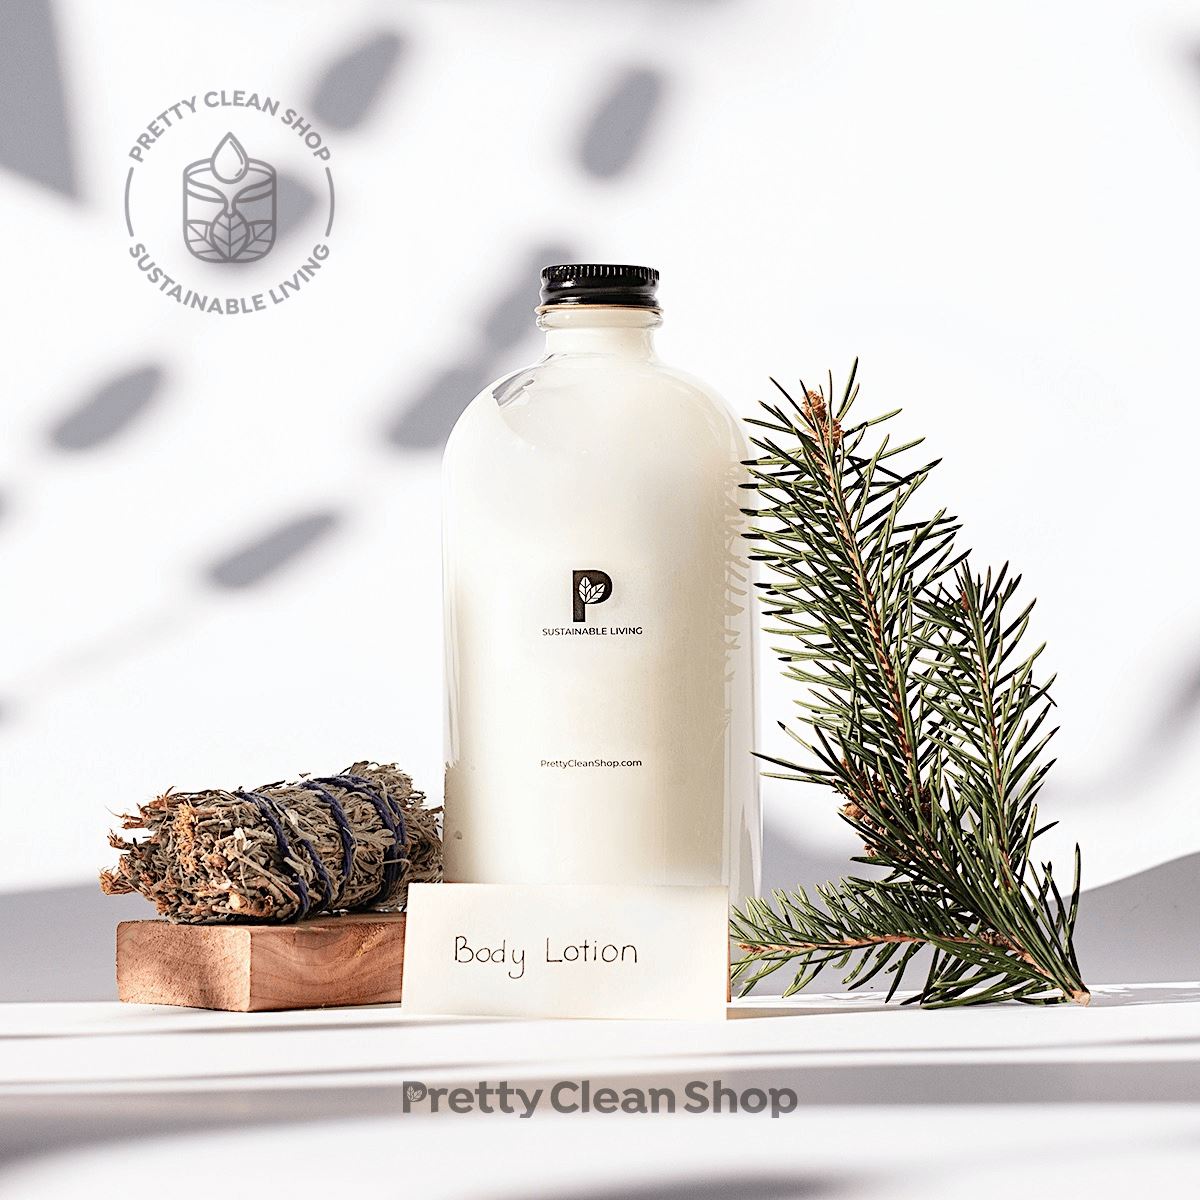 Oneka Body Lotion - Cedar & Sage Bath and Body Oneka 235ml glass bottle (REFILLABLE, includes $1.25 deposit) Prettycleanshop